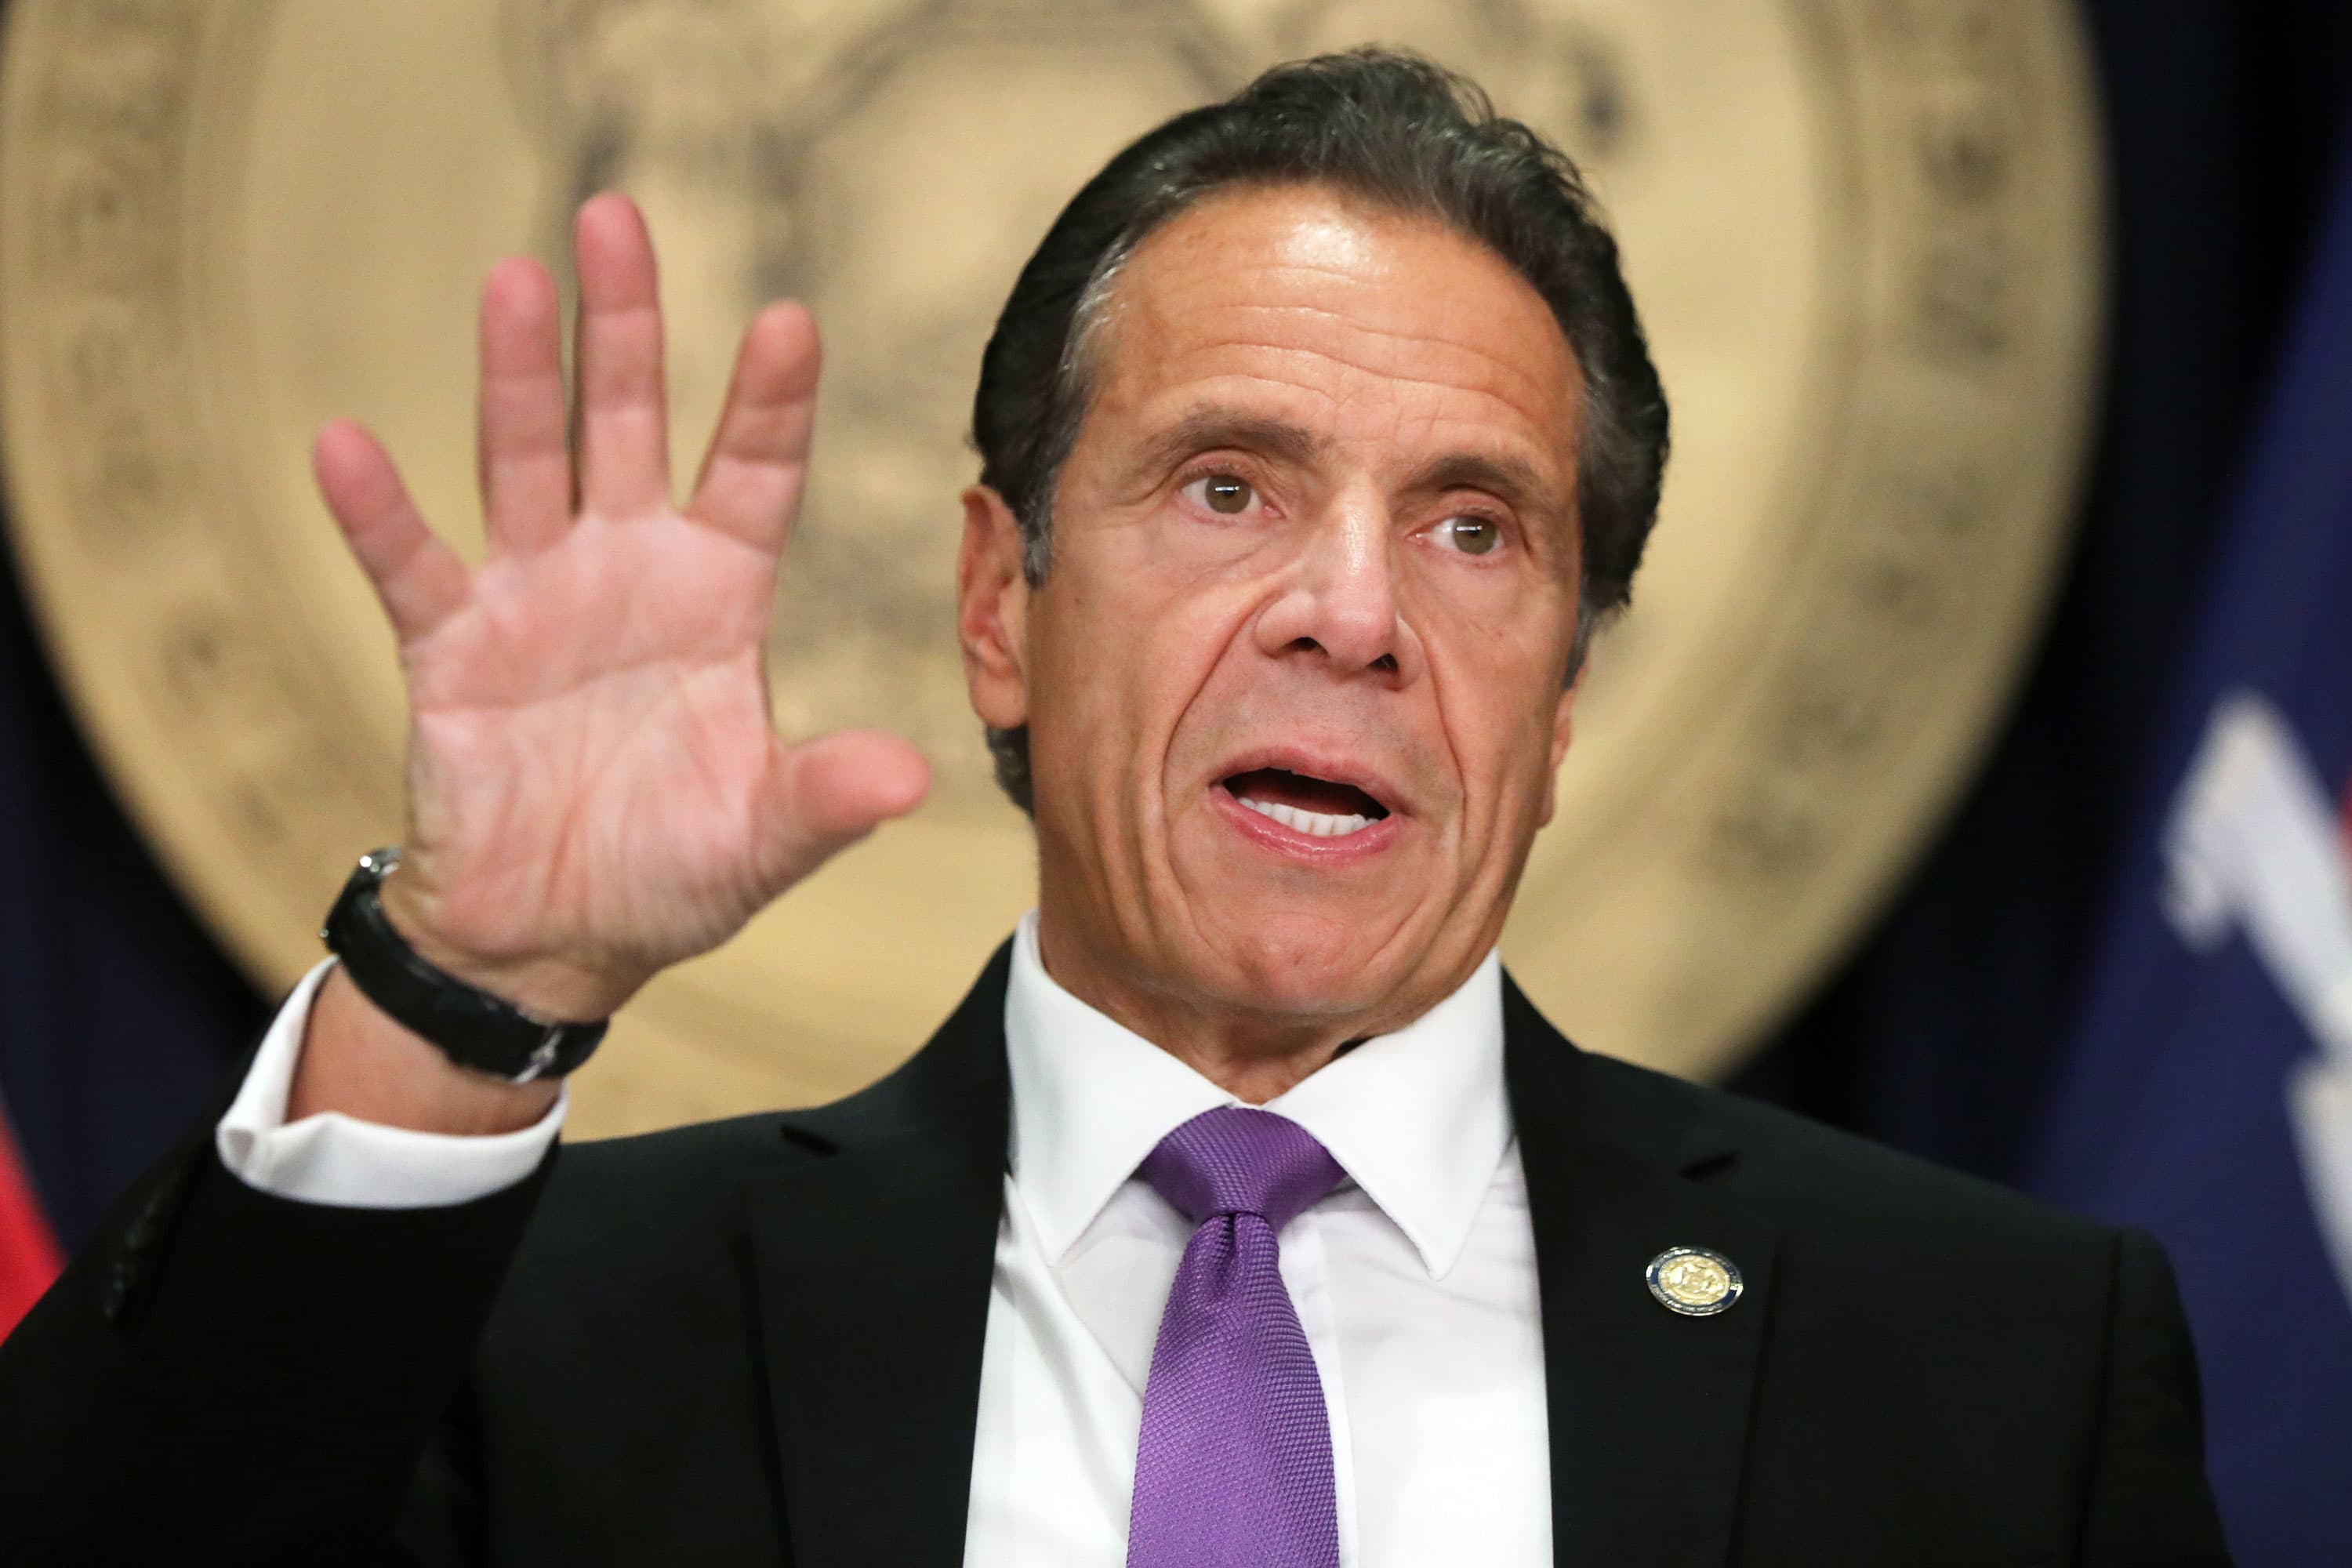 250 CEOs and executives sound the “alarm” over the biggest tax increase in New York history